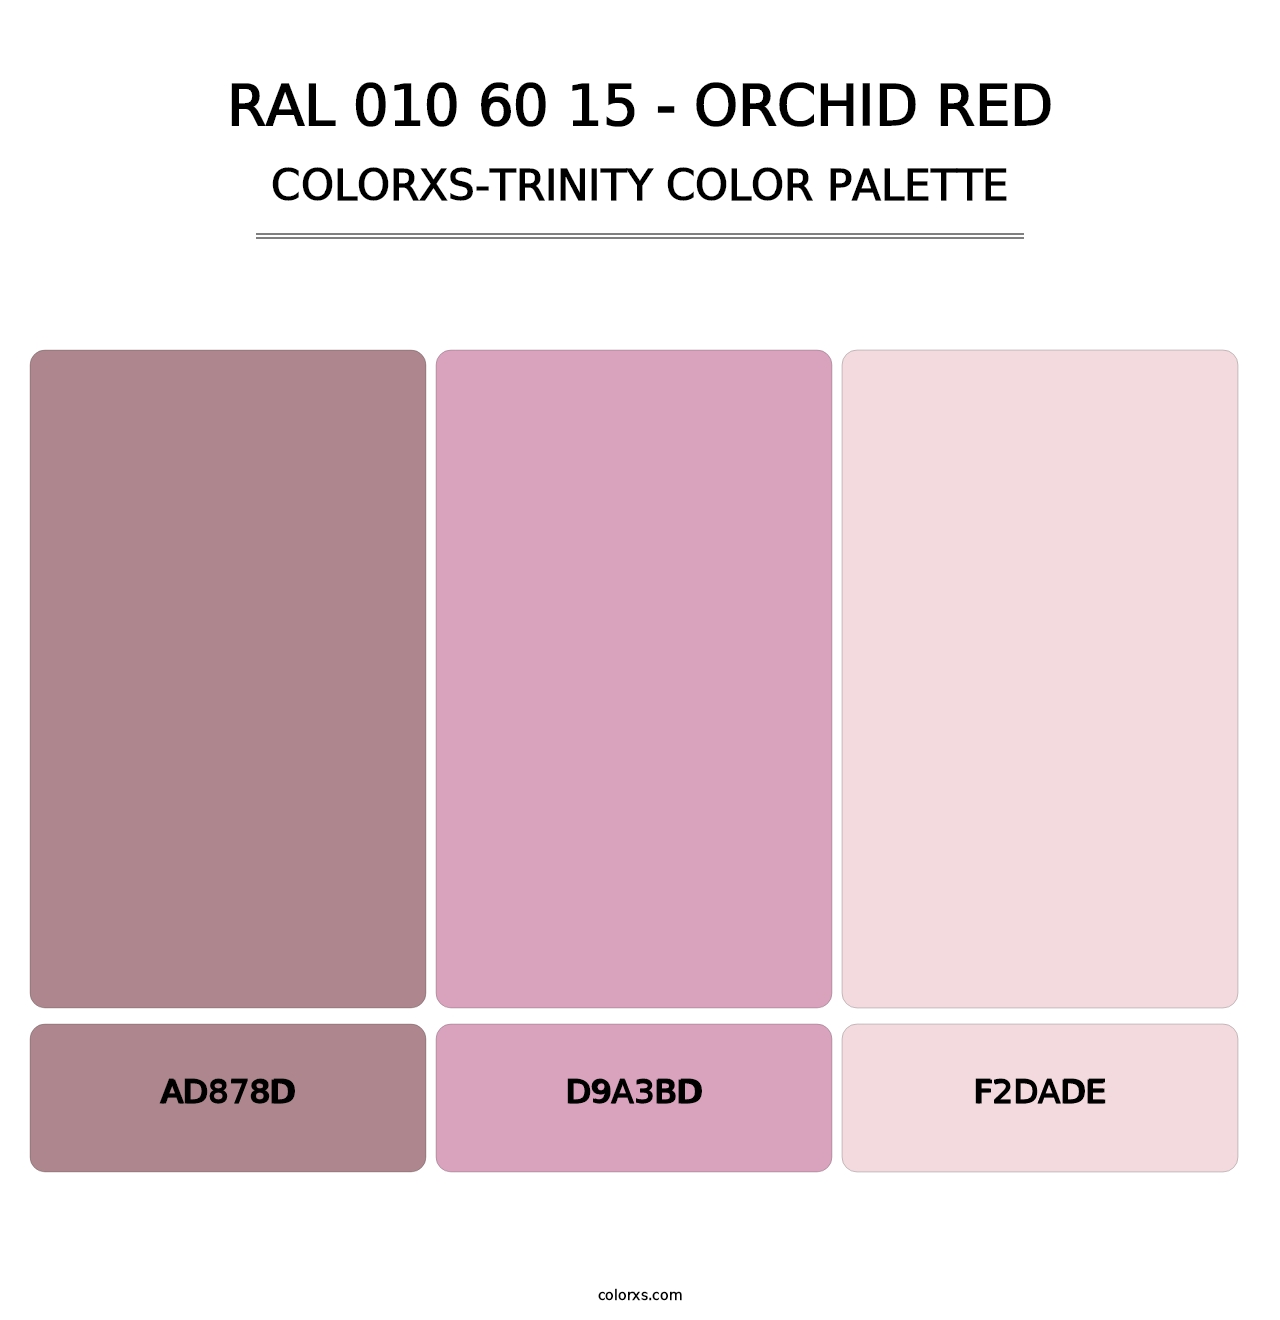 RAL 010 60 15 - Orchid Red - Colorxs Trinity Palette